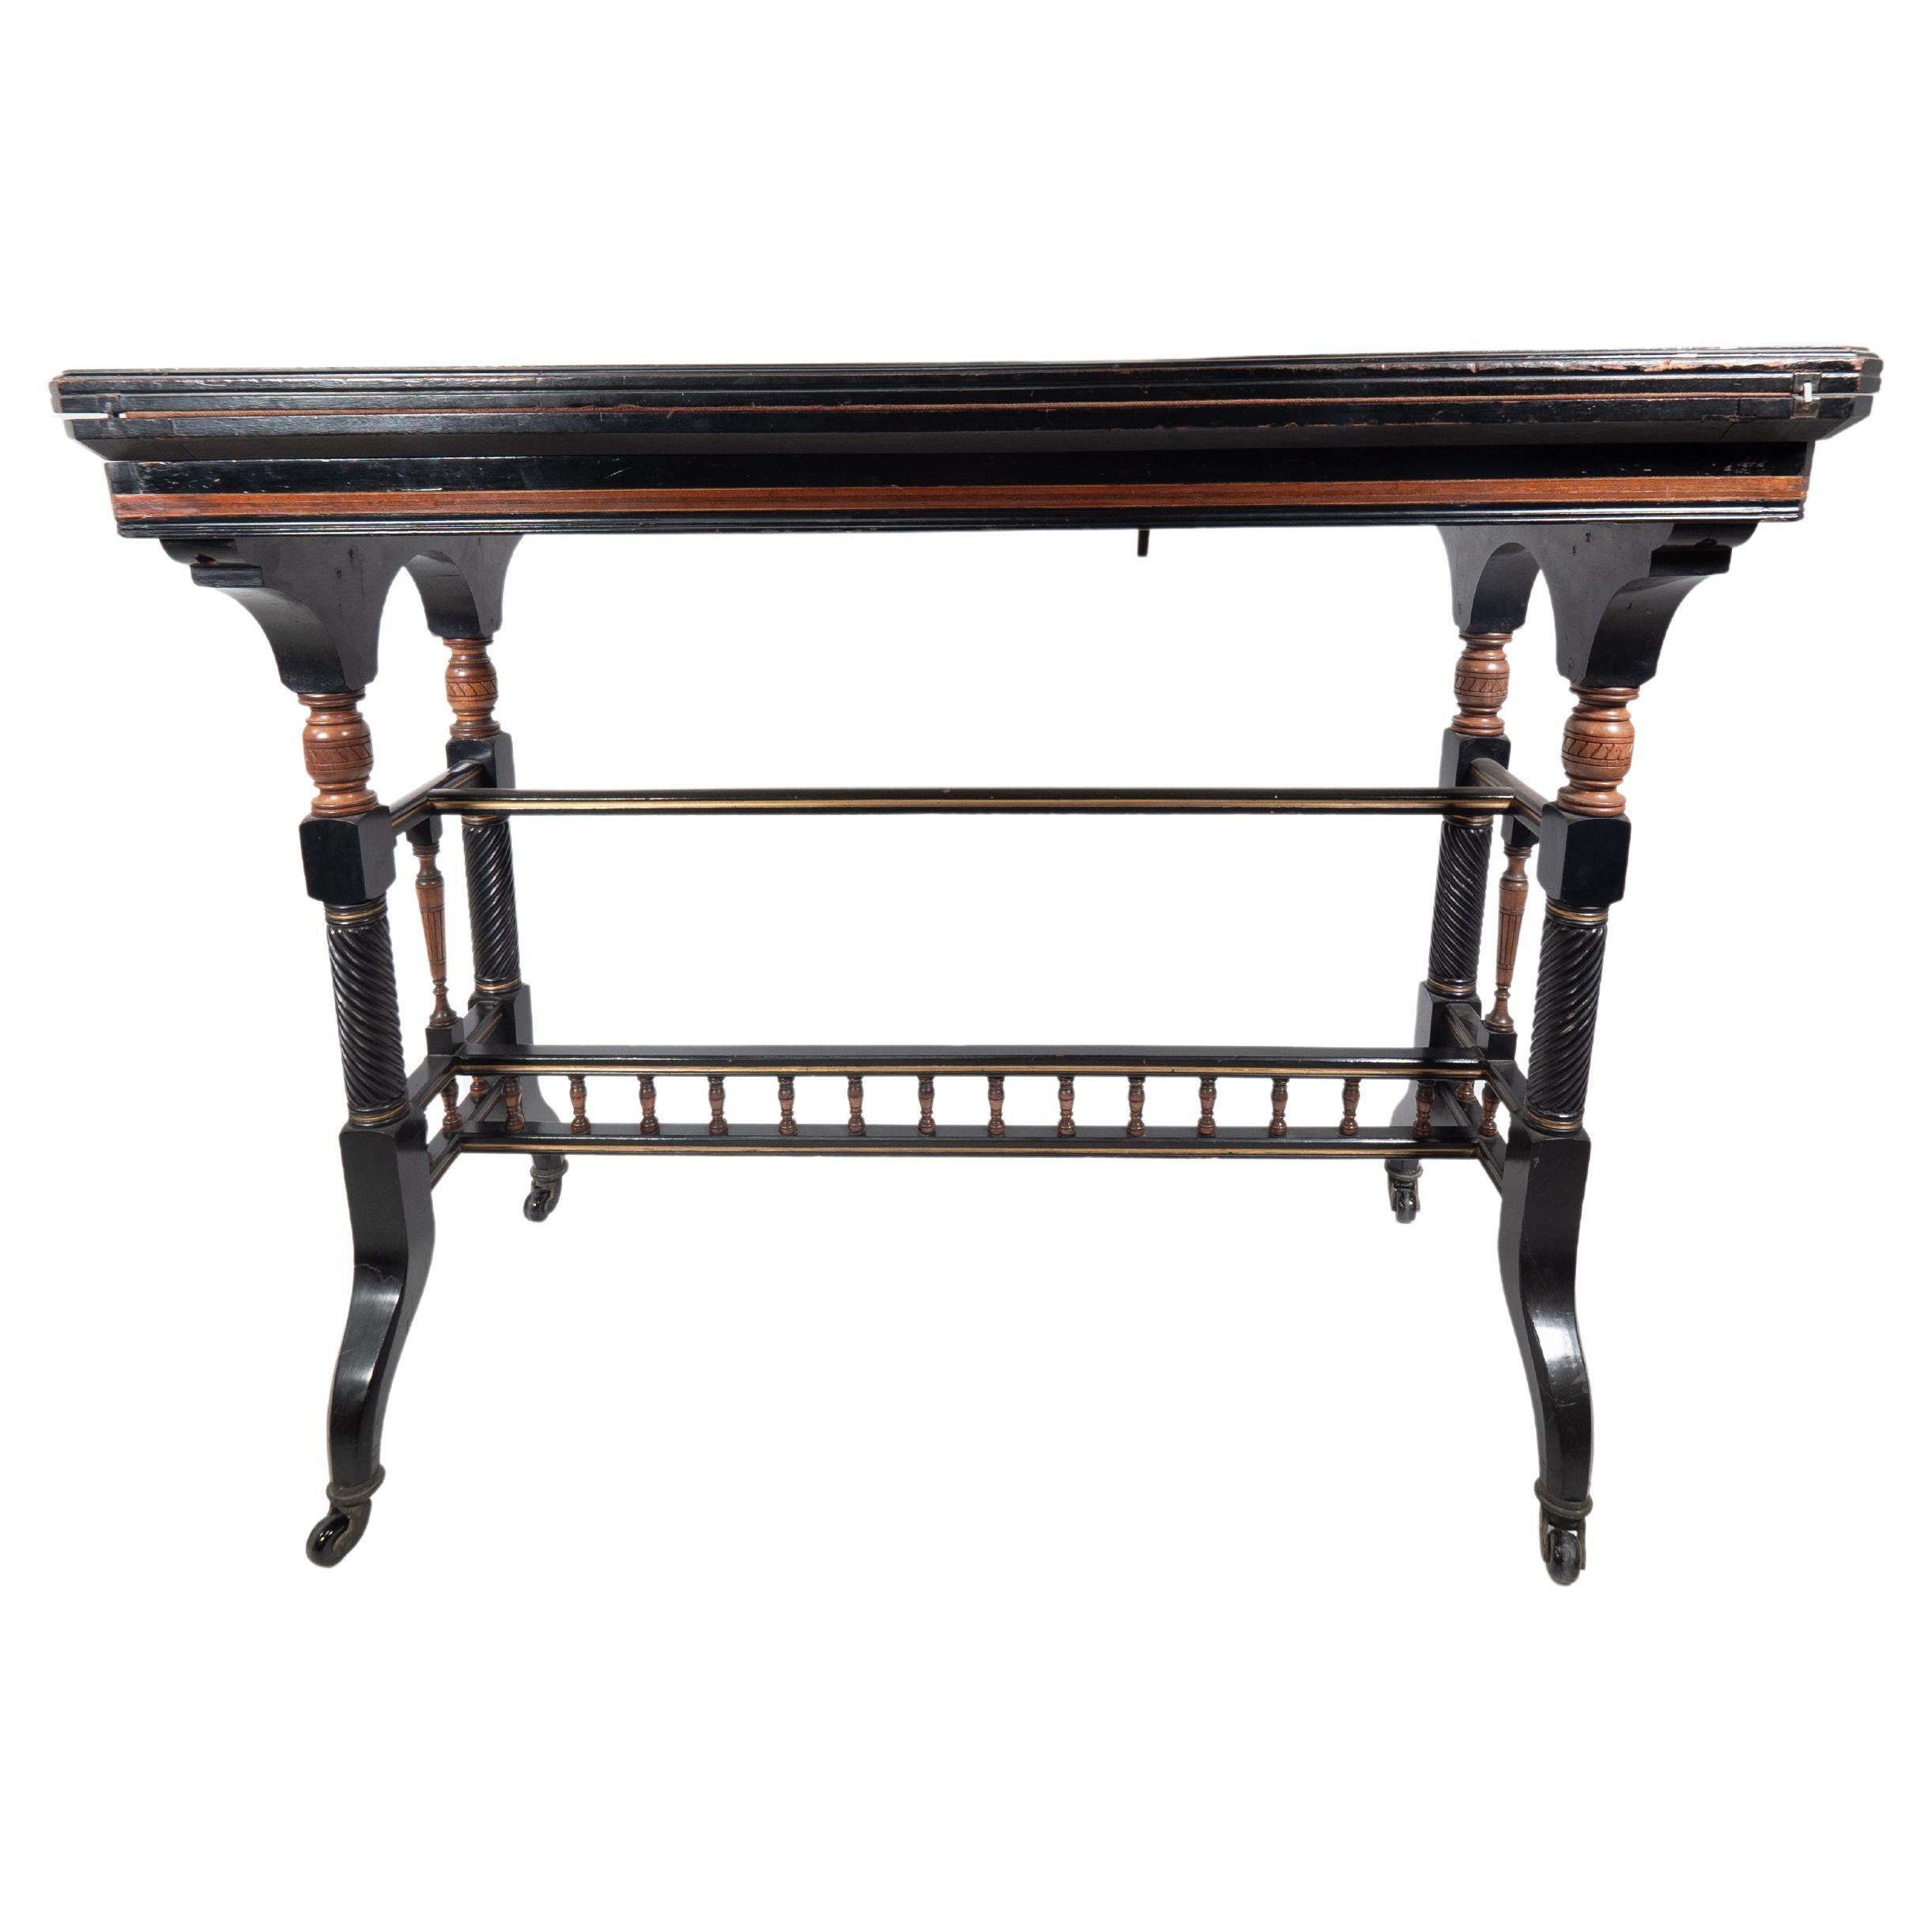 Gillows attributed. An Aesthetic Movement ebonized fold over and swivel top card table with the original red baize to the playing area. The rectangular top when closed and the upper sides have inlaid floral decoration, with incised boxwood turnings